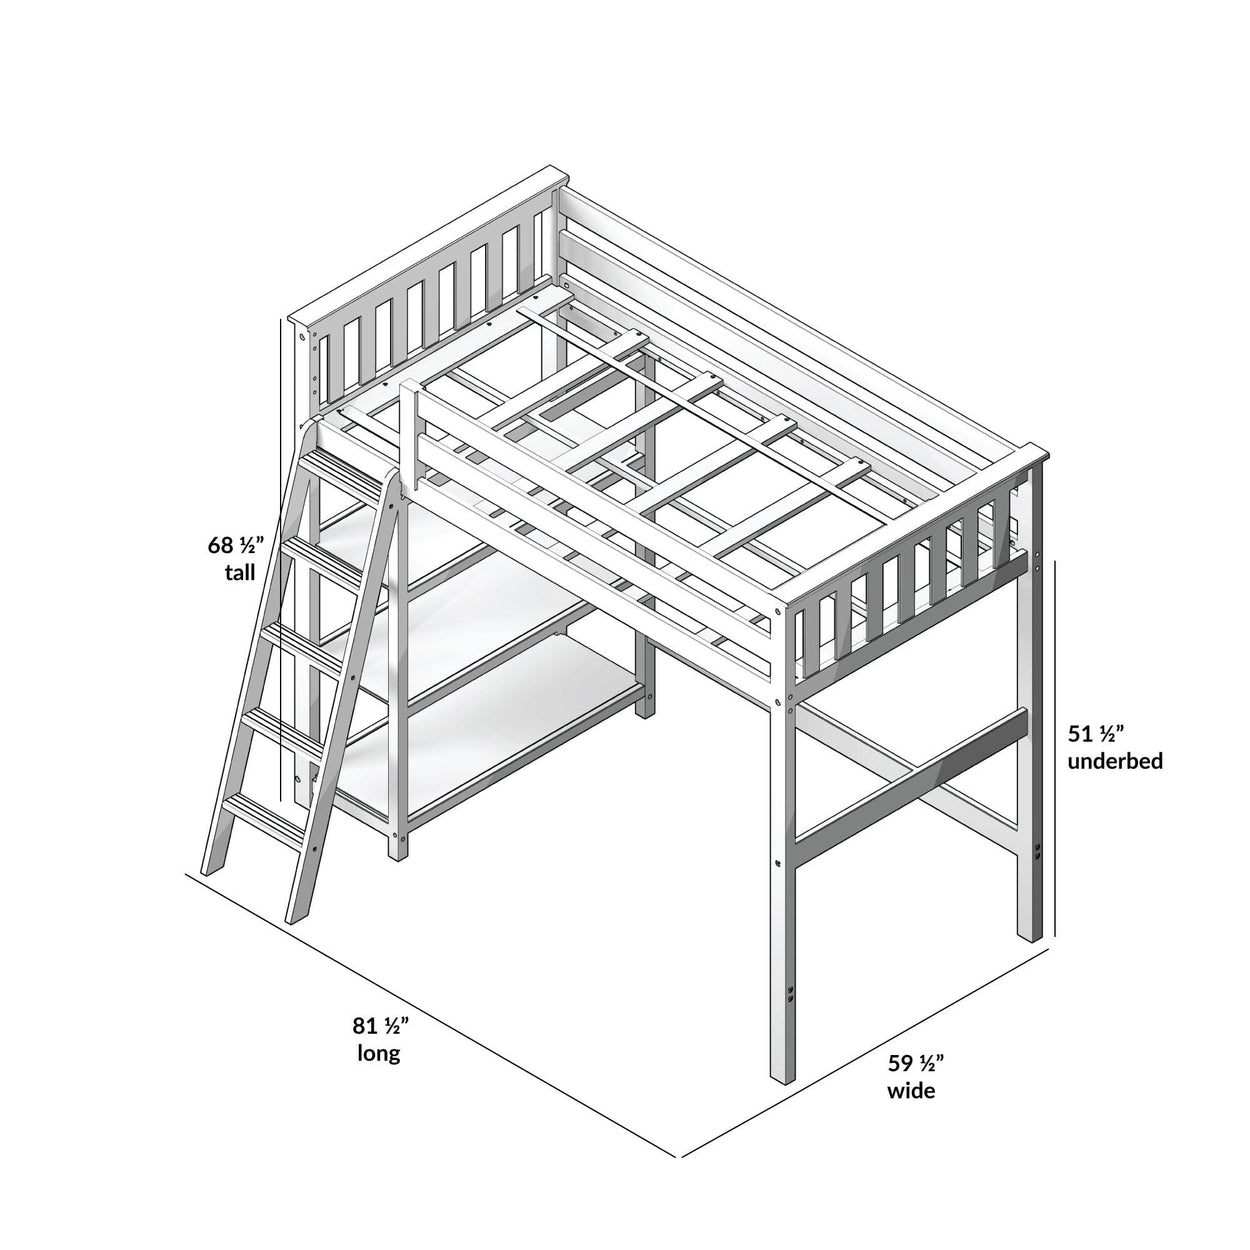 180218-151 : Loft Beds Twin-Size High Loft Bed with Bookcase, Clay